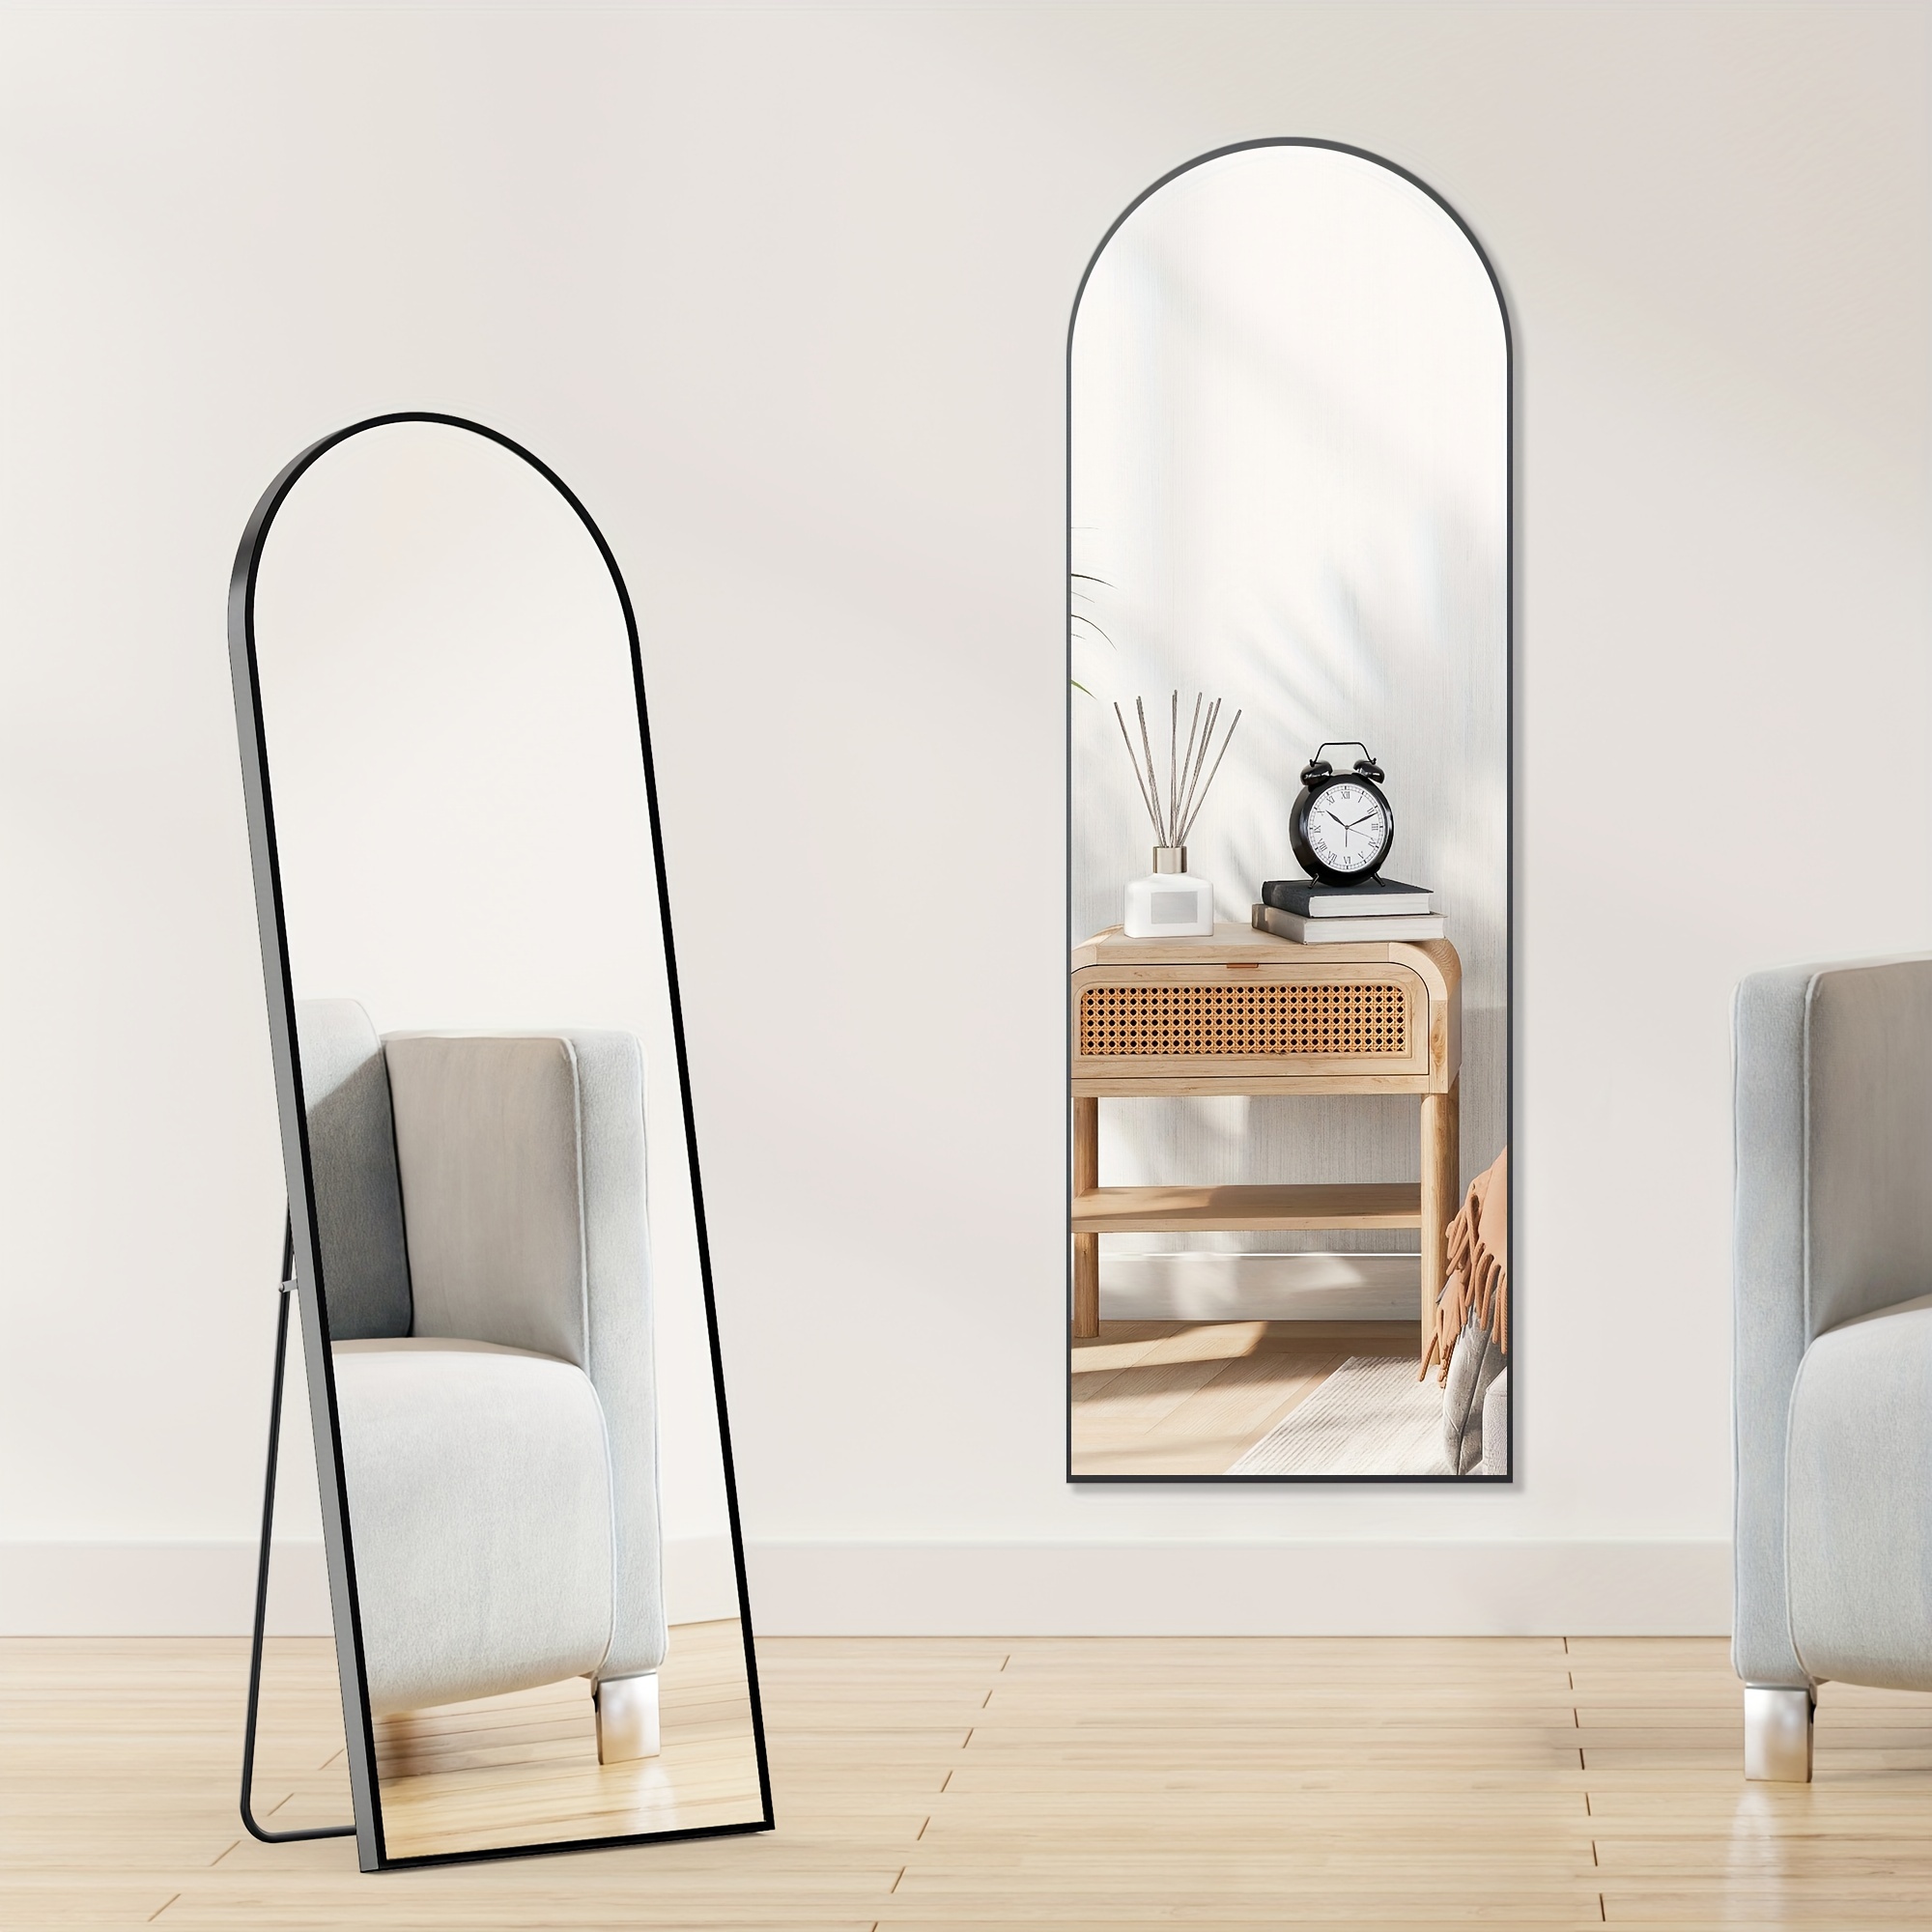 

Arched Full Length Mirror 59"x16" Full Body Floor Mirror Standing Hanging Or Leaning Wall, Arch Wall Mirror With Stand Aluminum Alloy Thin Frame For Bedroom Cloakroom Living Room